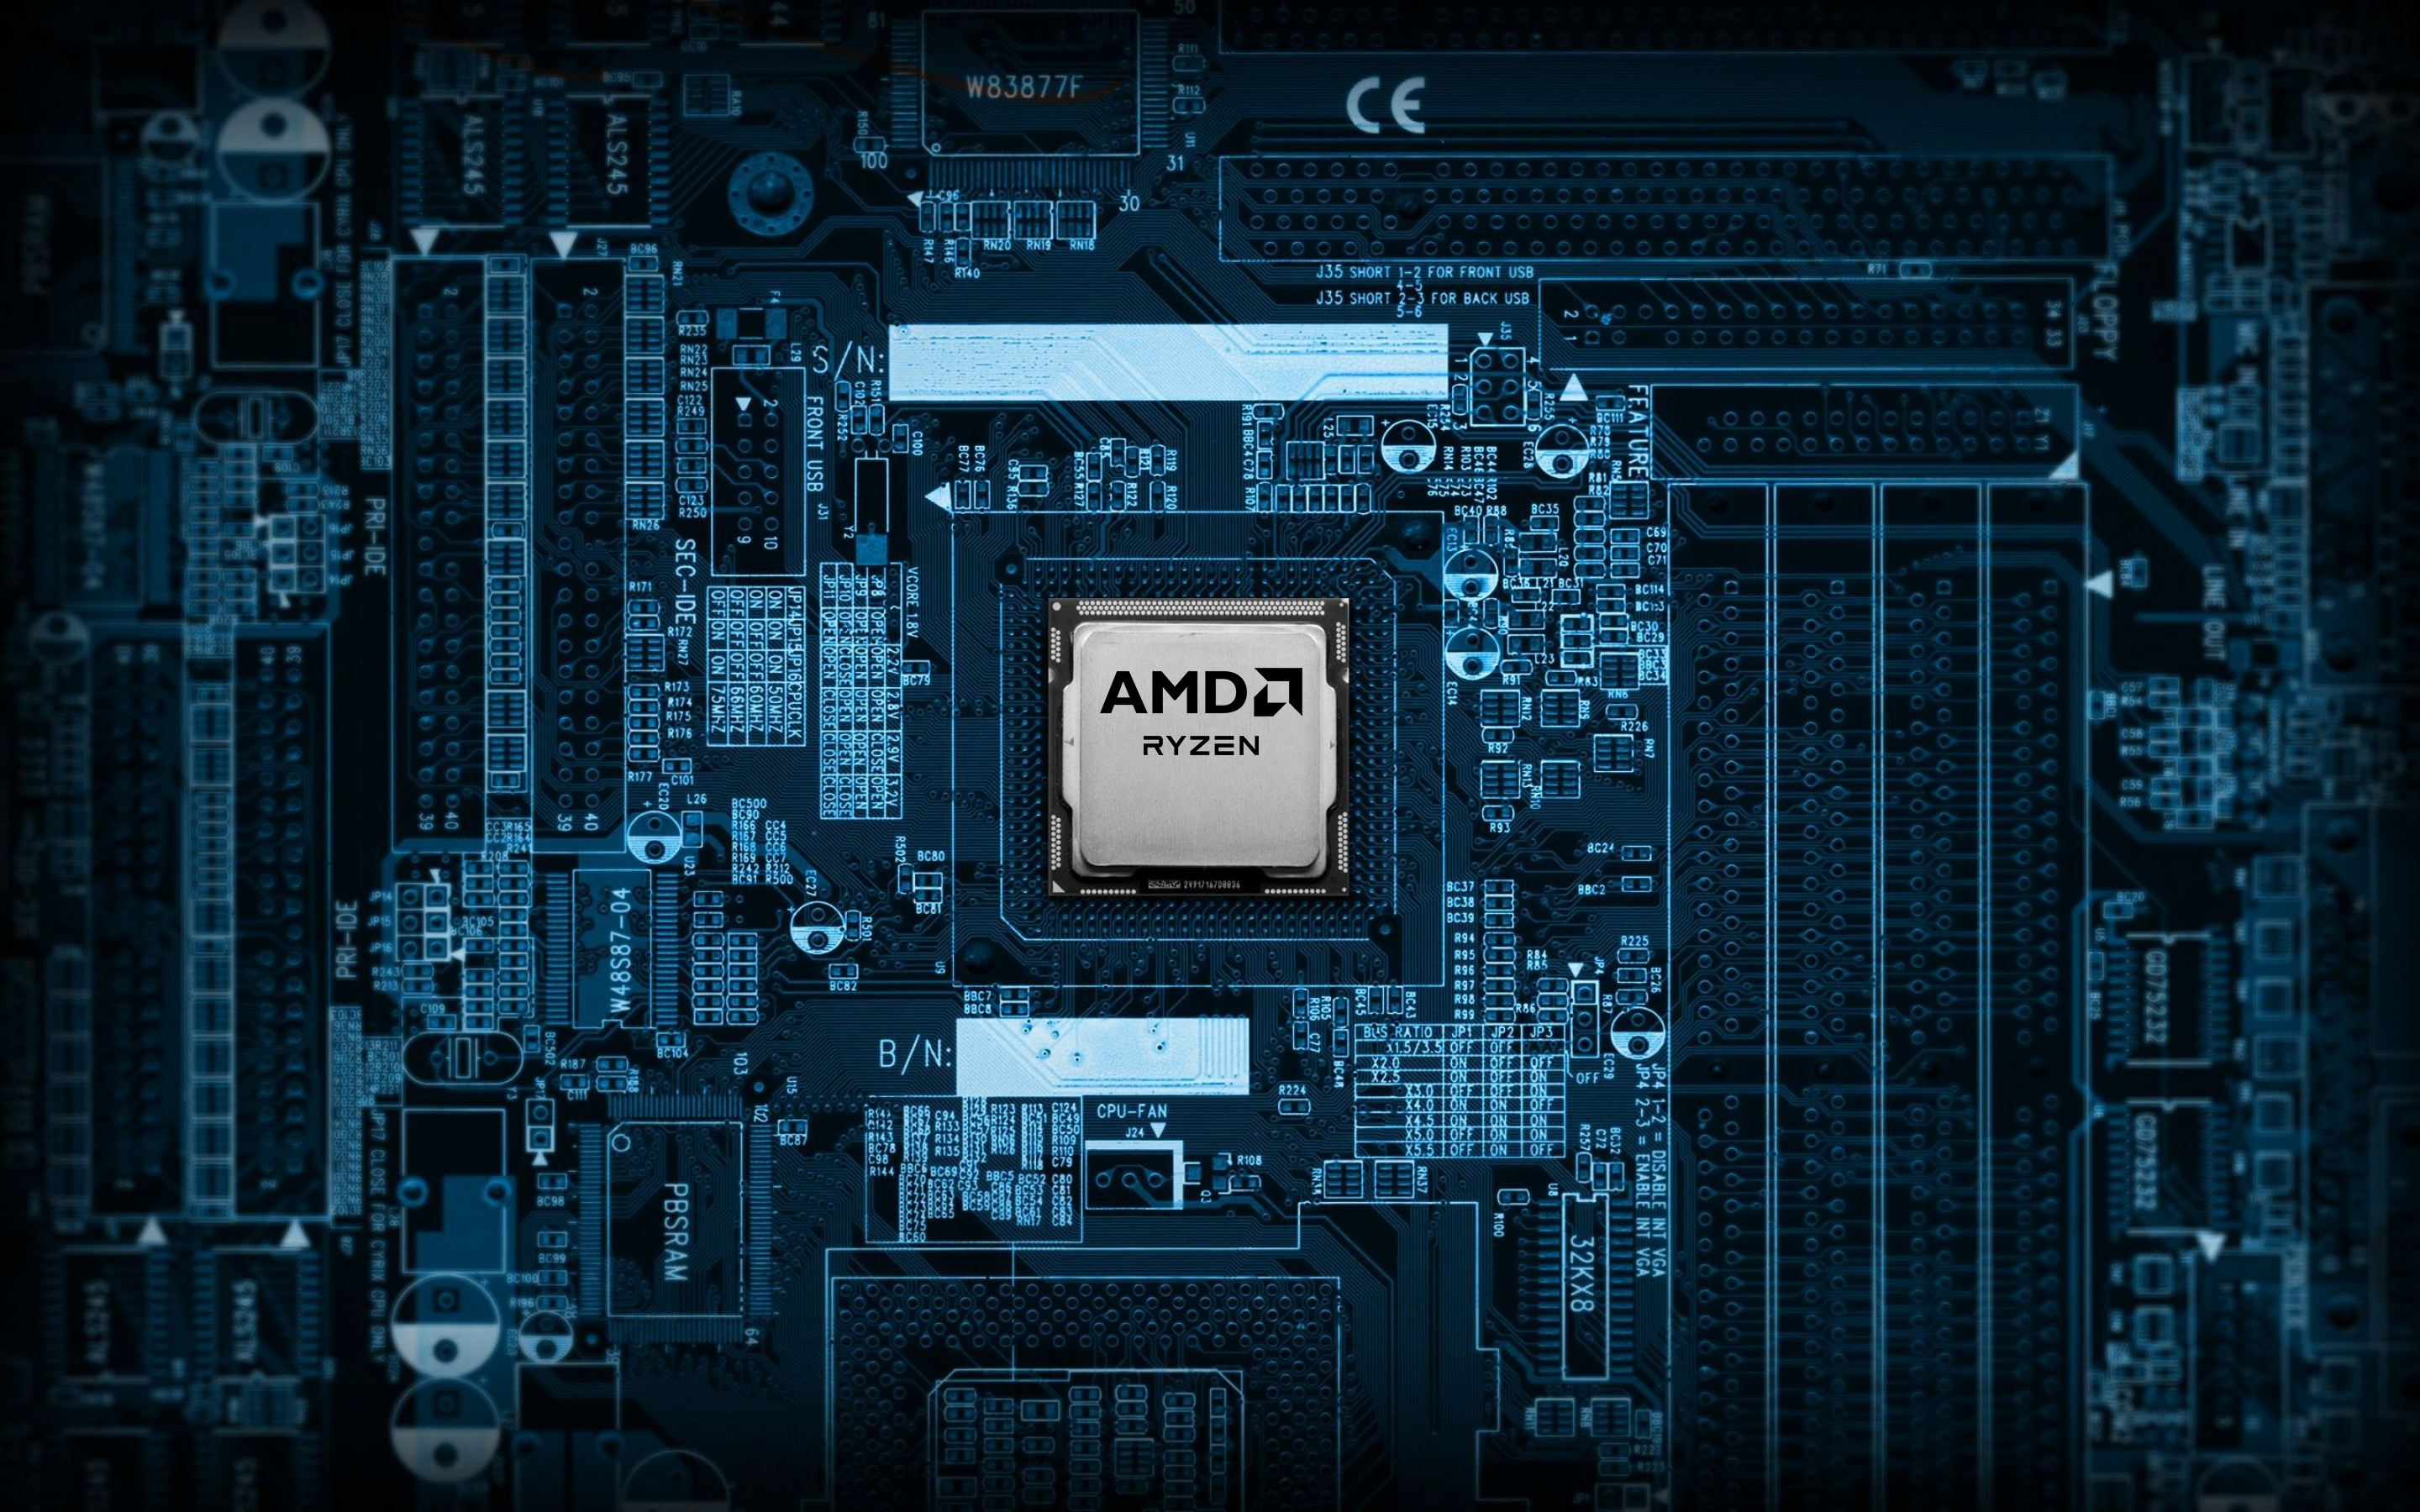 I Changed This Wallpaper To Have The Amd Ryzen Logo Thought Some